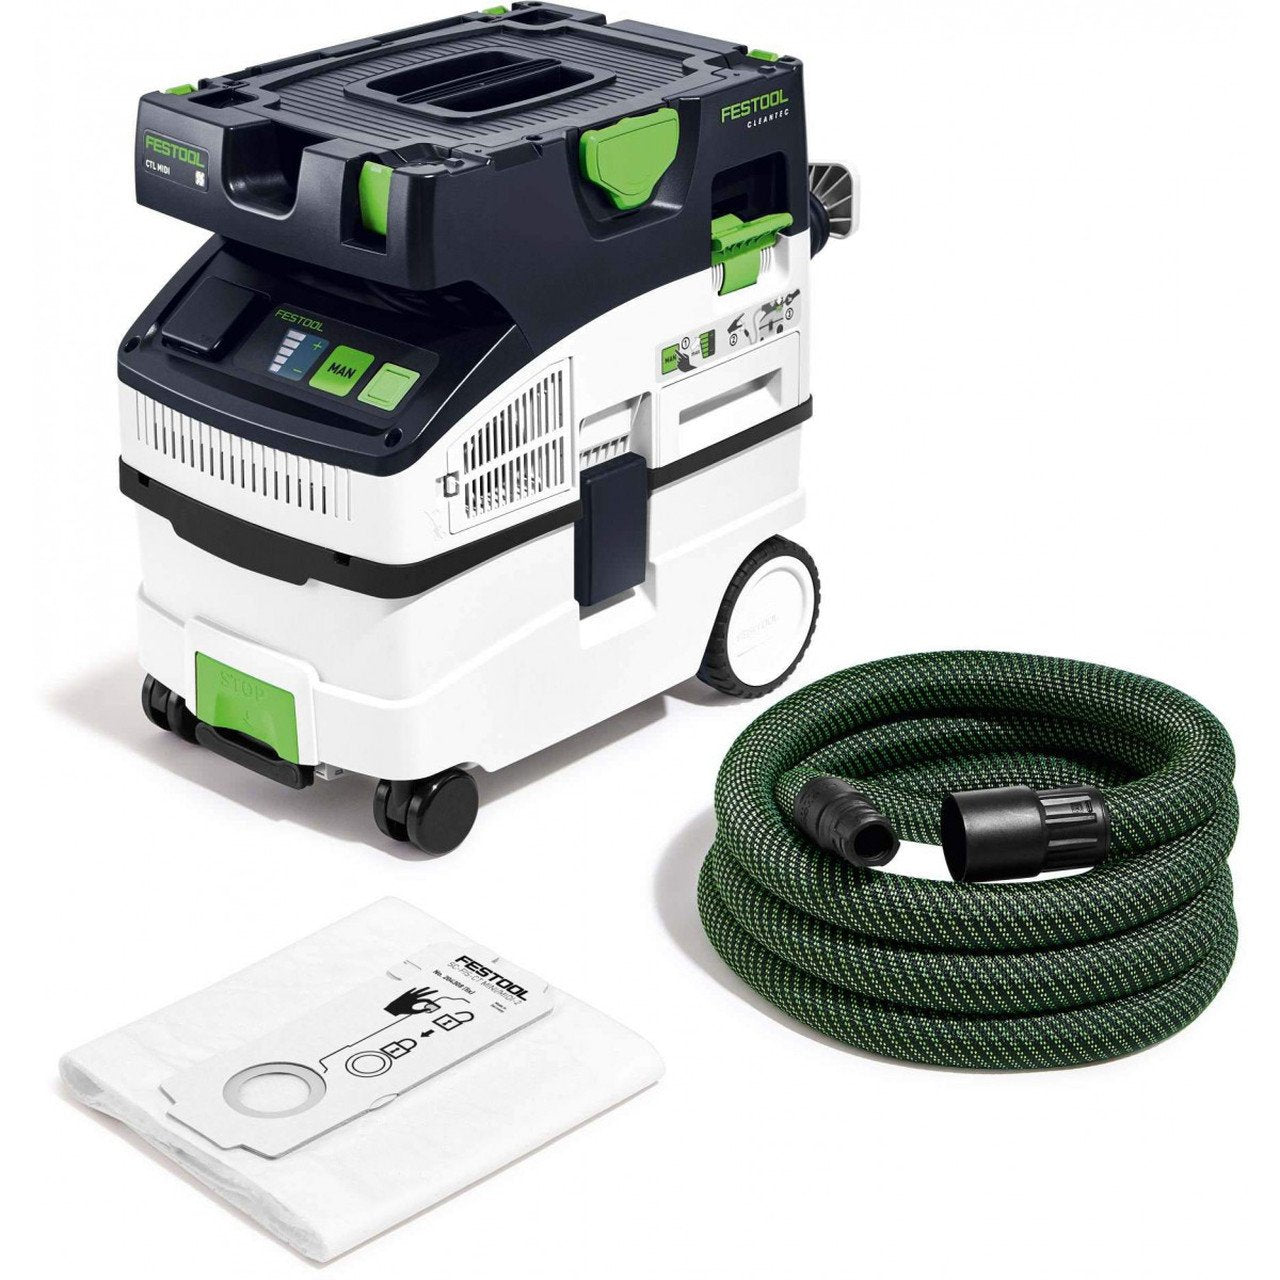 The CT MIDI I includes dust extractor on casters, cord wrap, Sys-Dock, Self-clean filter bag, and D27mm x 3.5m hose.